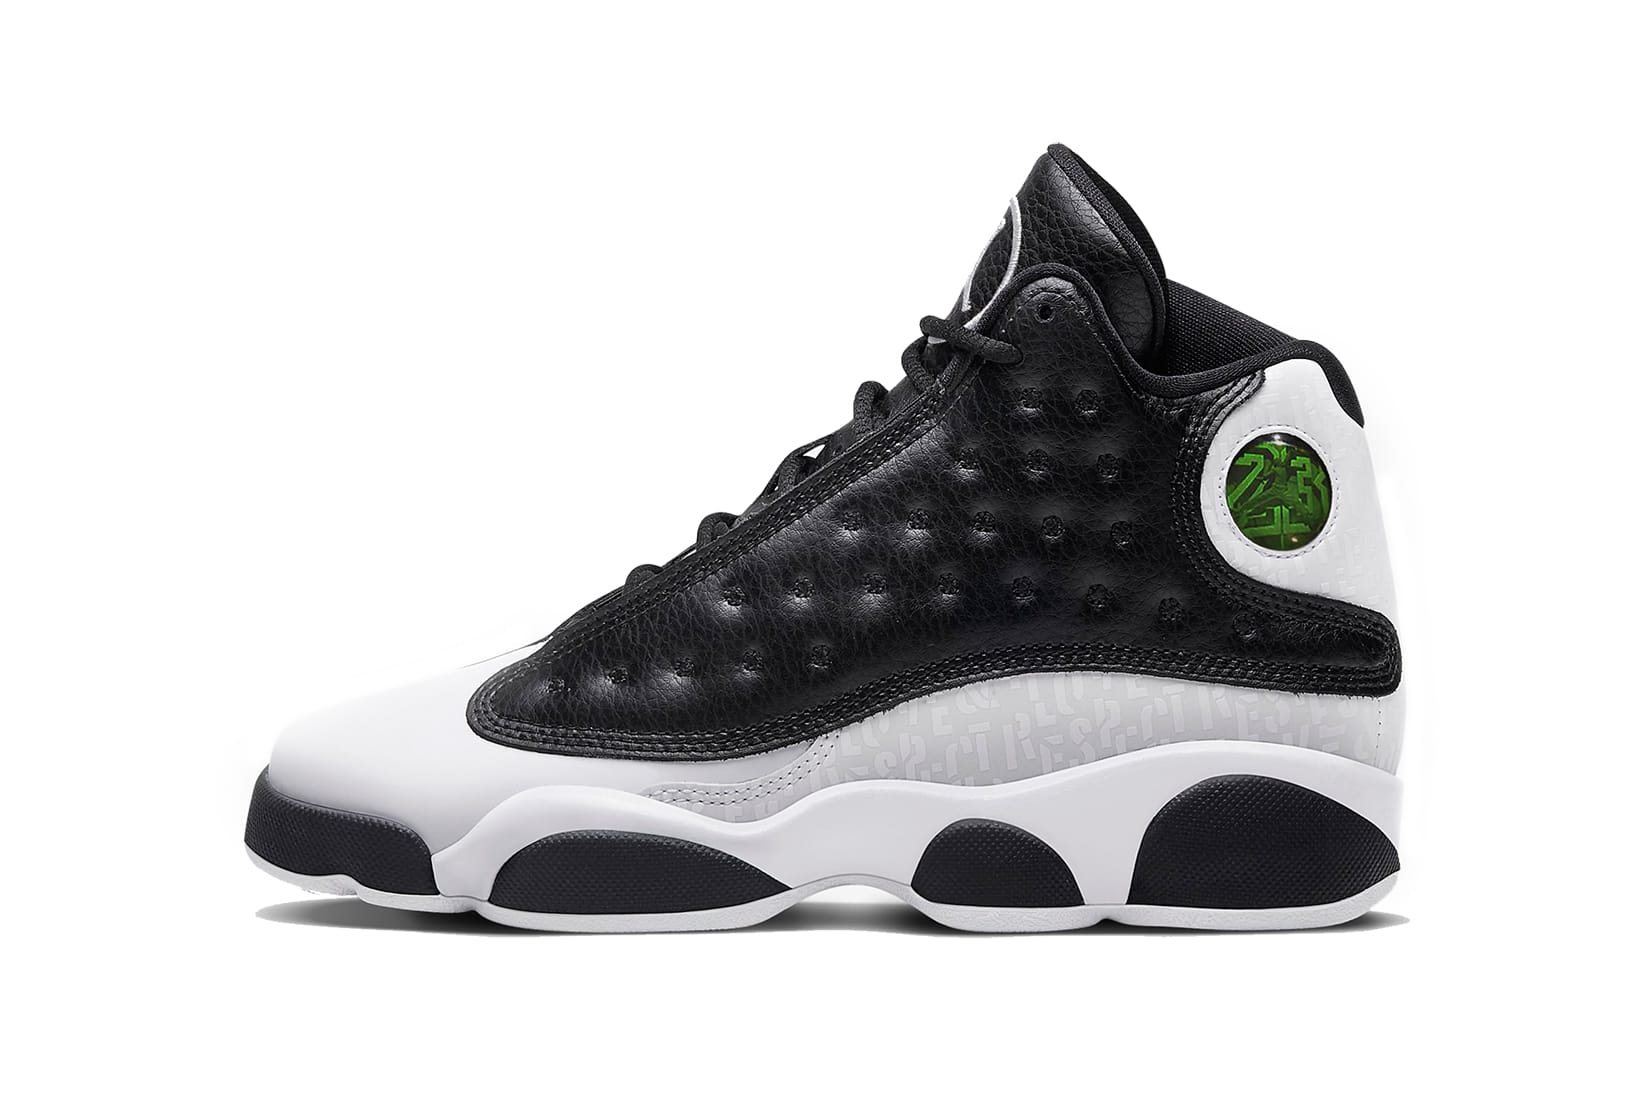 when did the black and white 13s come out